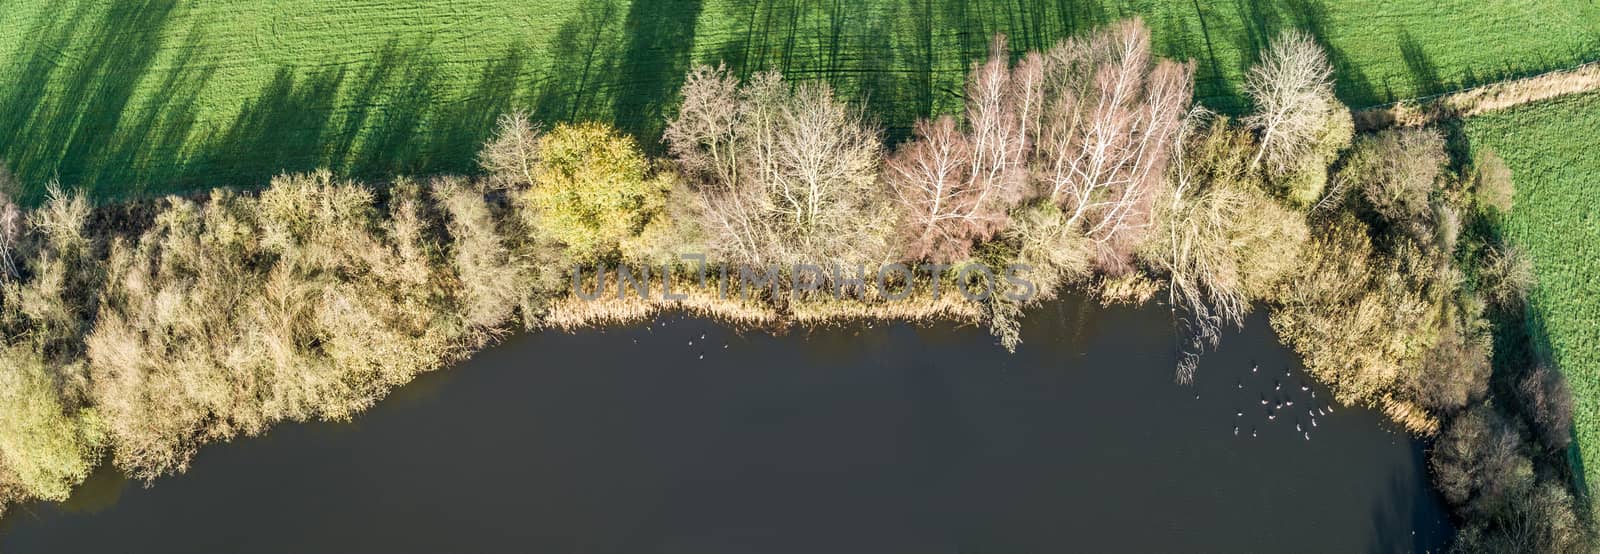 Composite panorama of aerial photos from the bank of a pond in L by geogif